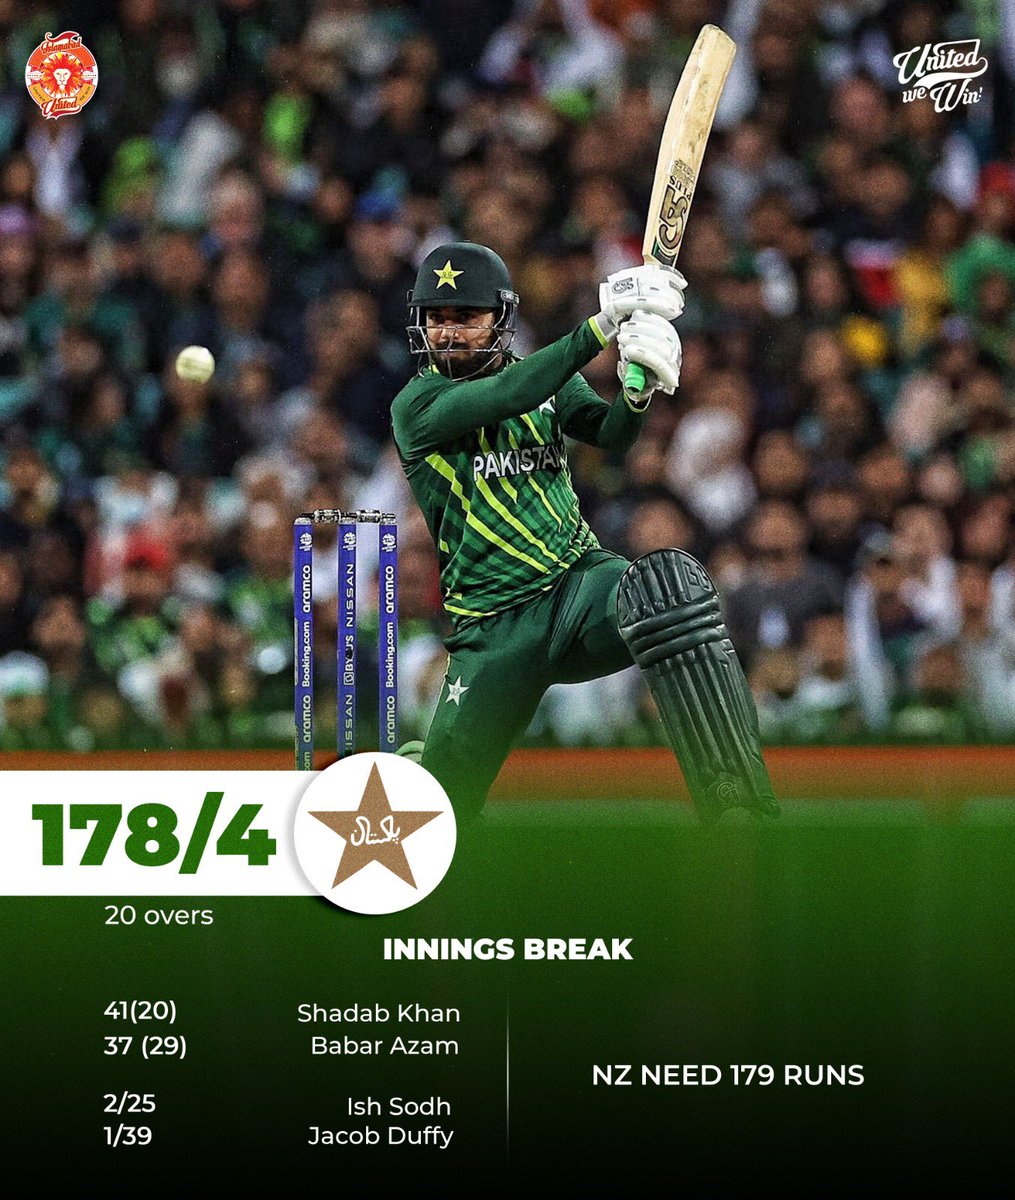 Pakistan set a total of 178/4! Shadab Khan roars with a quickfire 41 off just 20 balls, proving his worth as an impact player. 🔥 Great contributions from Irfan Khan, Babar, and Rizwan too! Time to defend. 🙌 #PAKvNZ #UnitedForPakistan